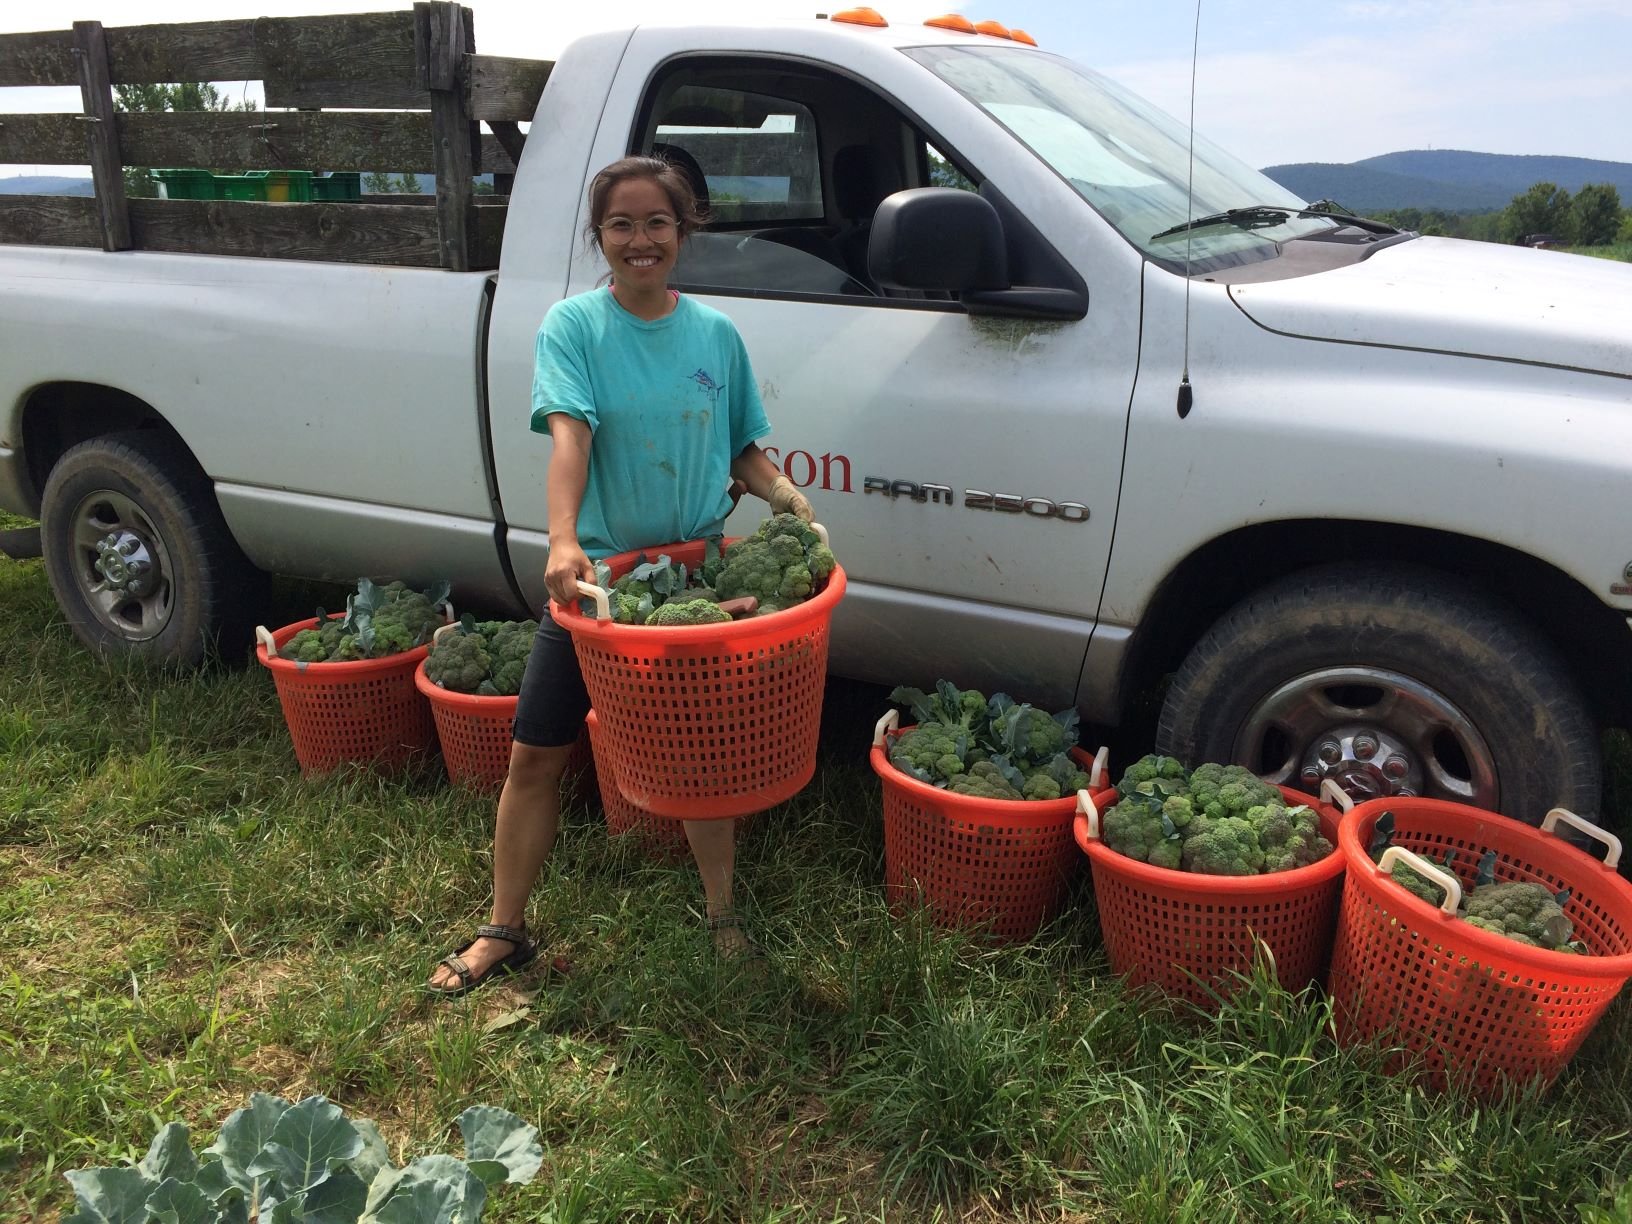 Previous Happening: Tuesday CSA: Dickinson College Farm Field Notes for Week of July 1st!